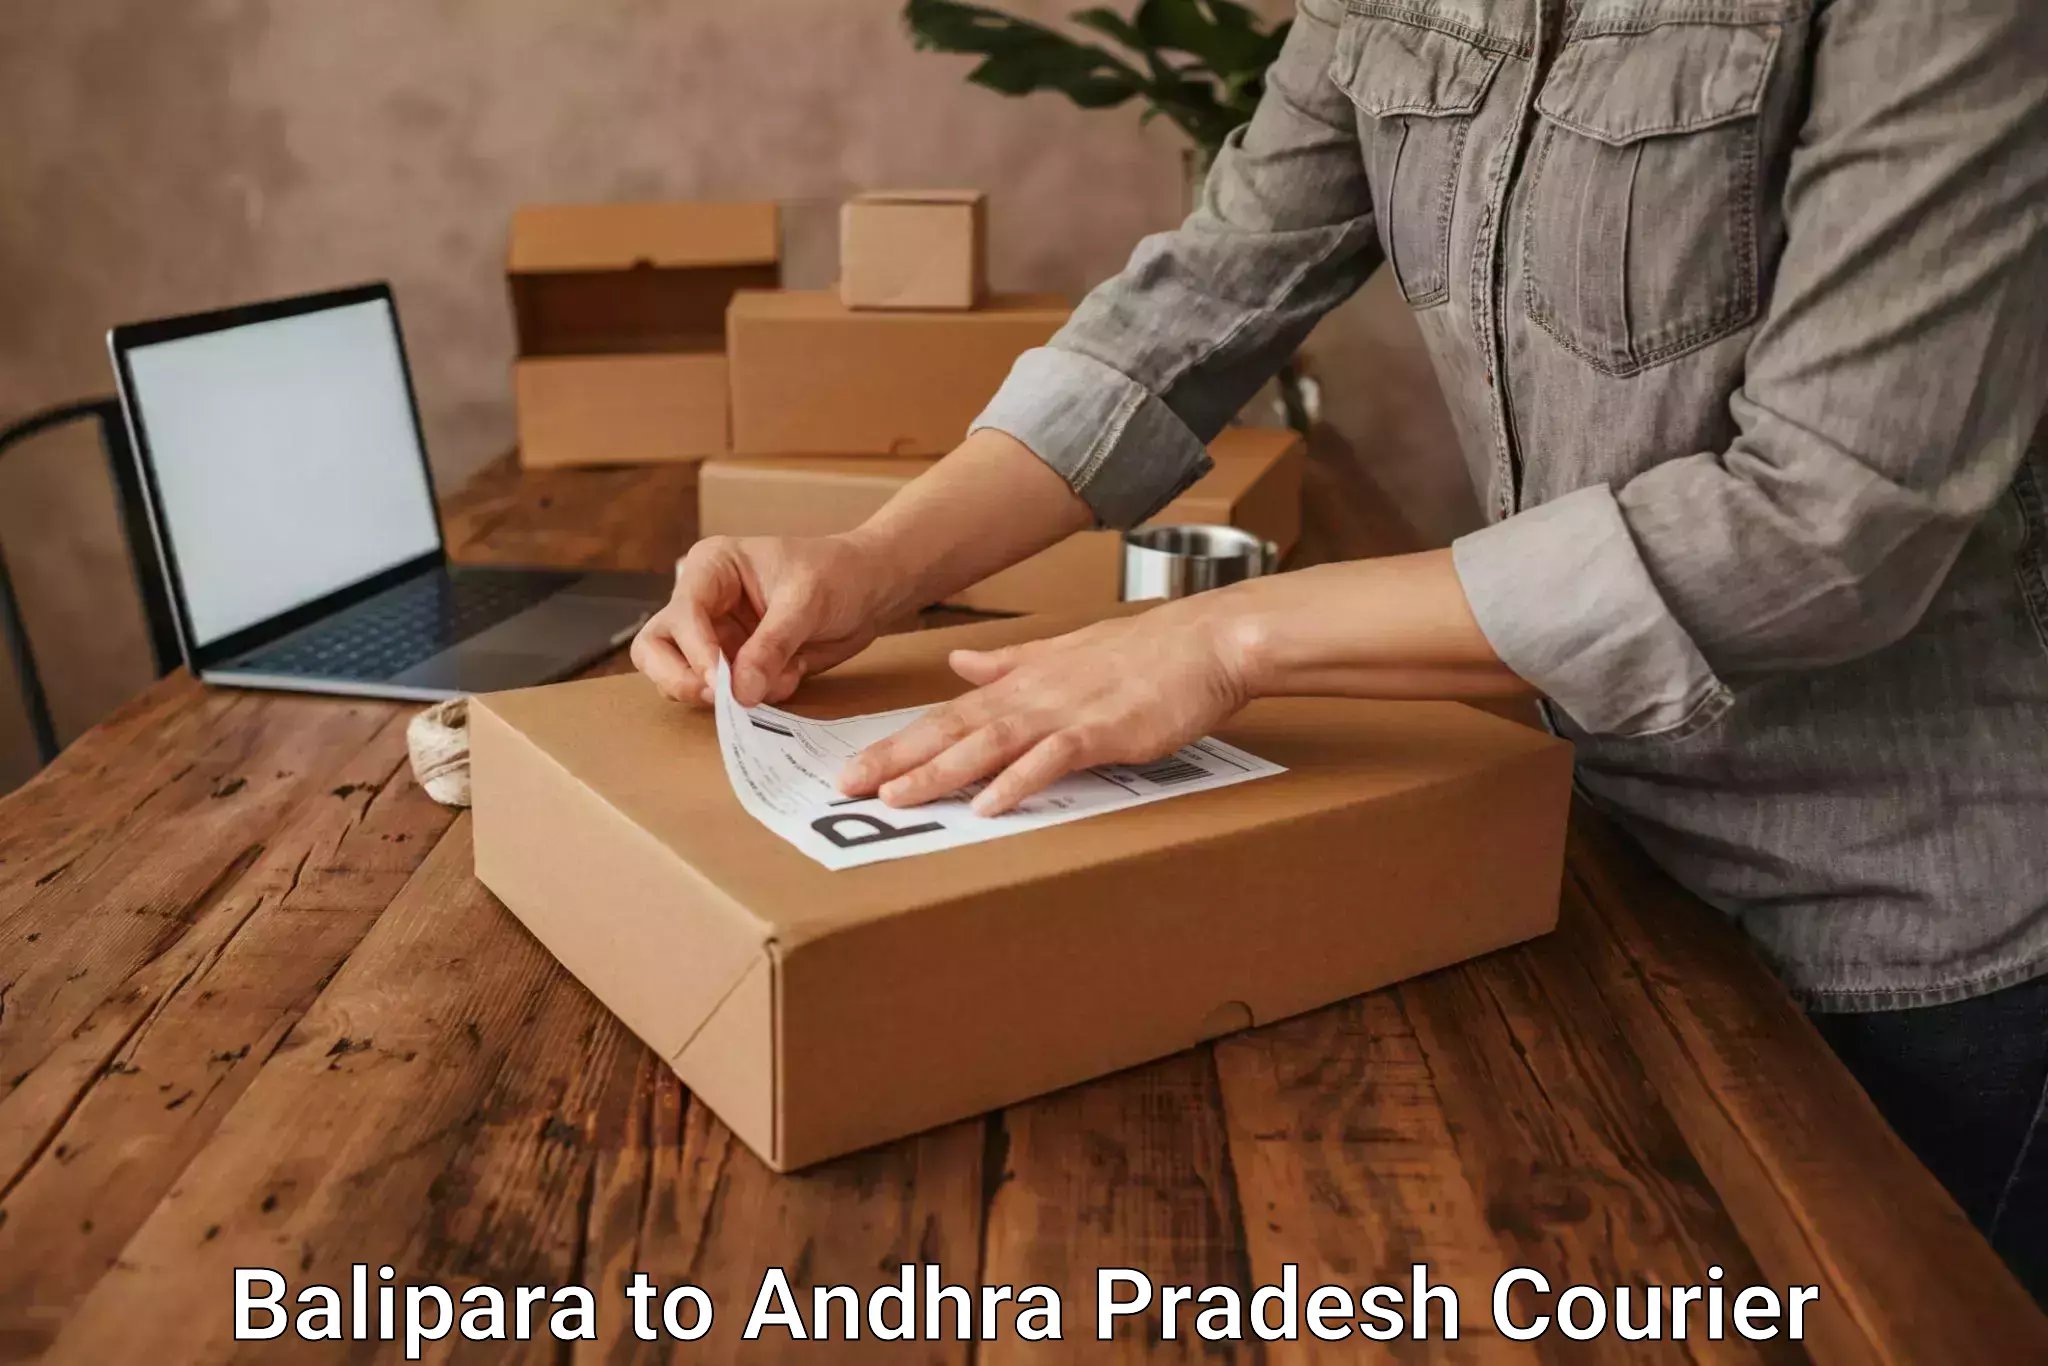 Residential courier service Balipara to Visakhapatnam Port